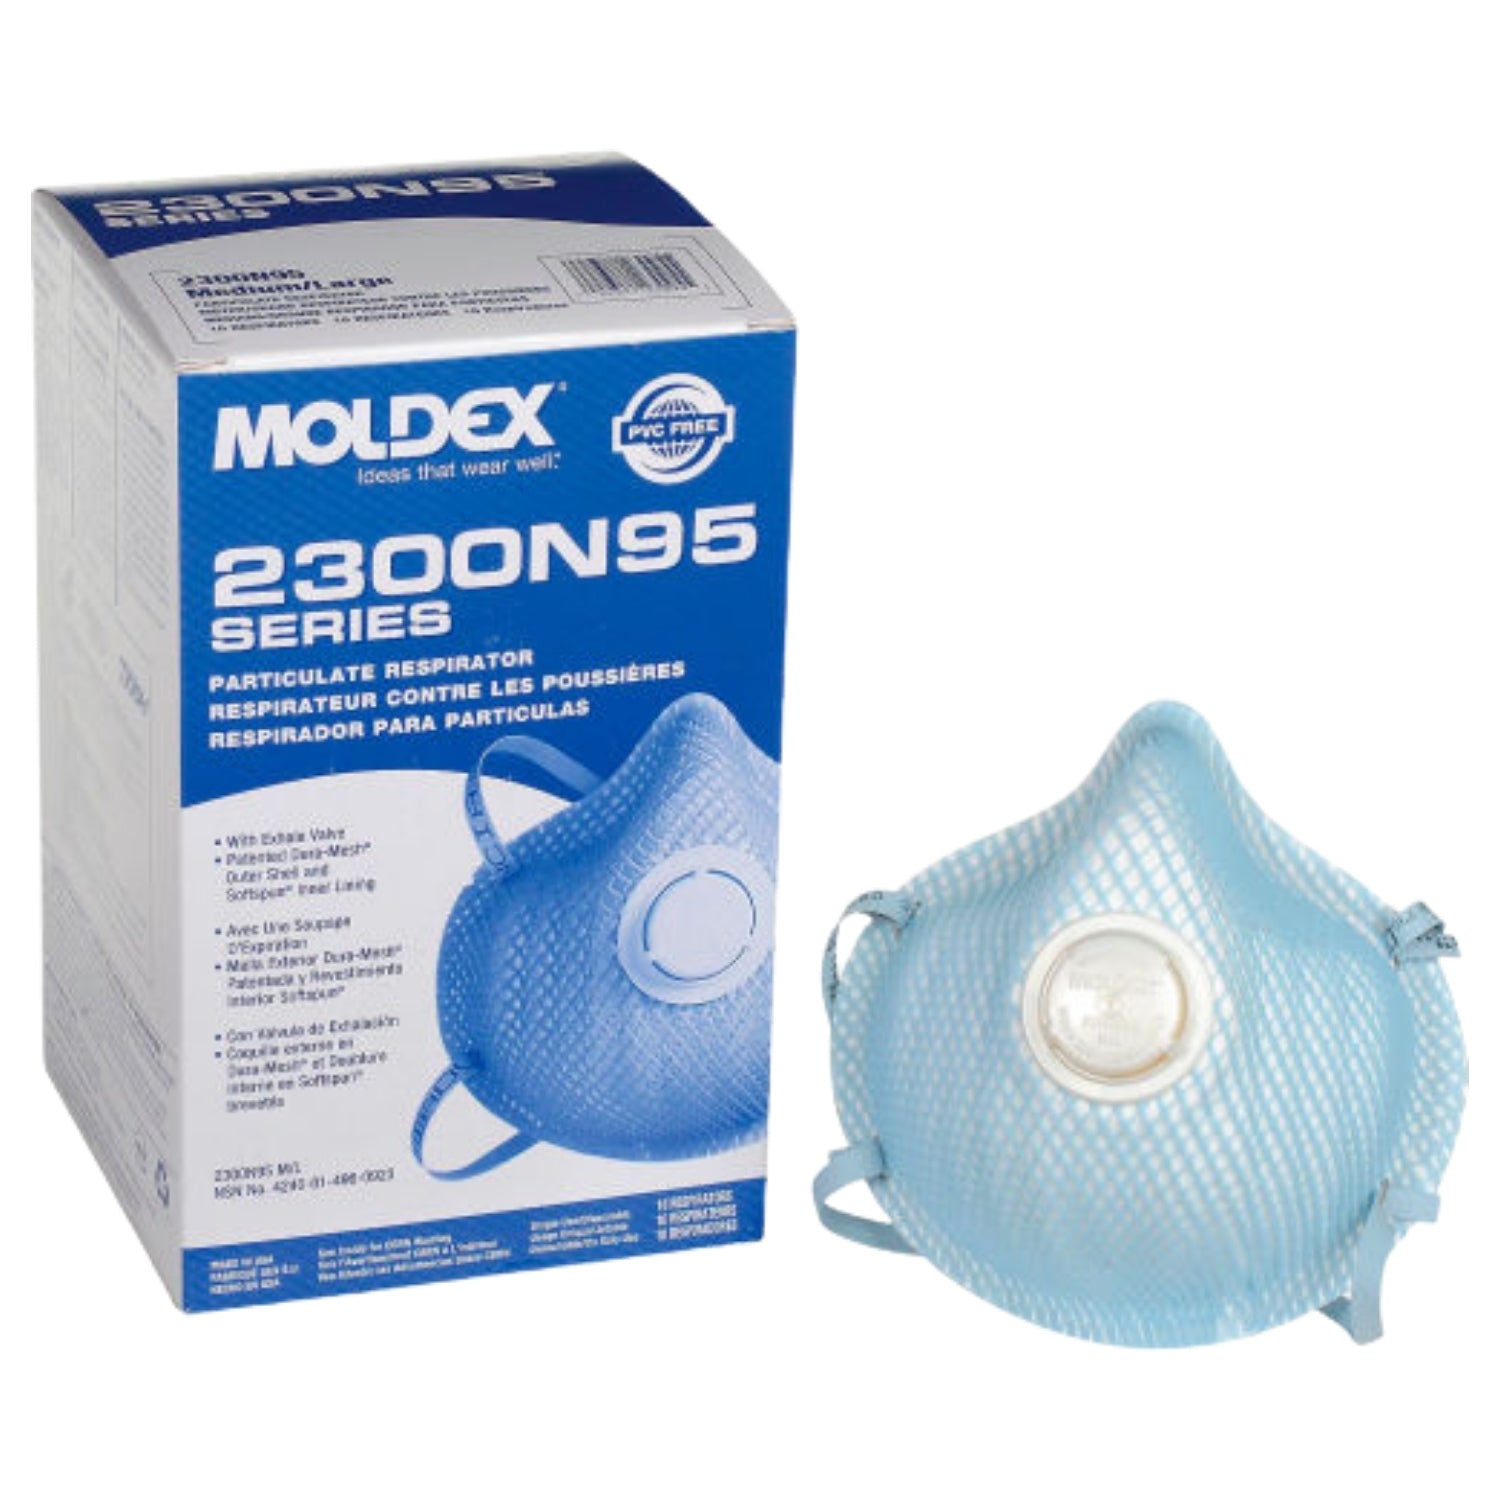 MOLDEX 2300N95 Series - Particulate Respirators With Exhale Valve - 10/BOX